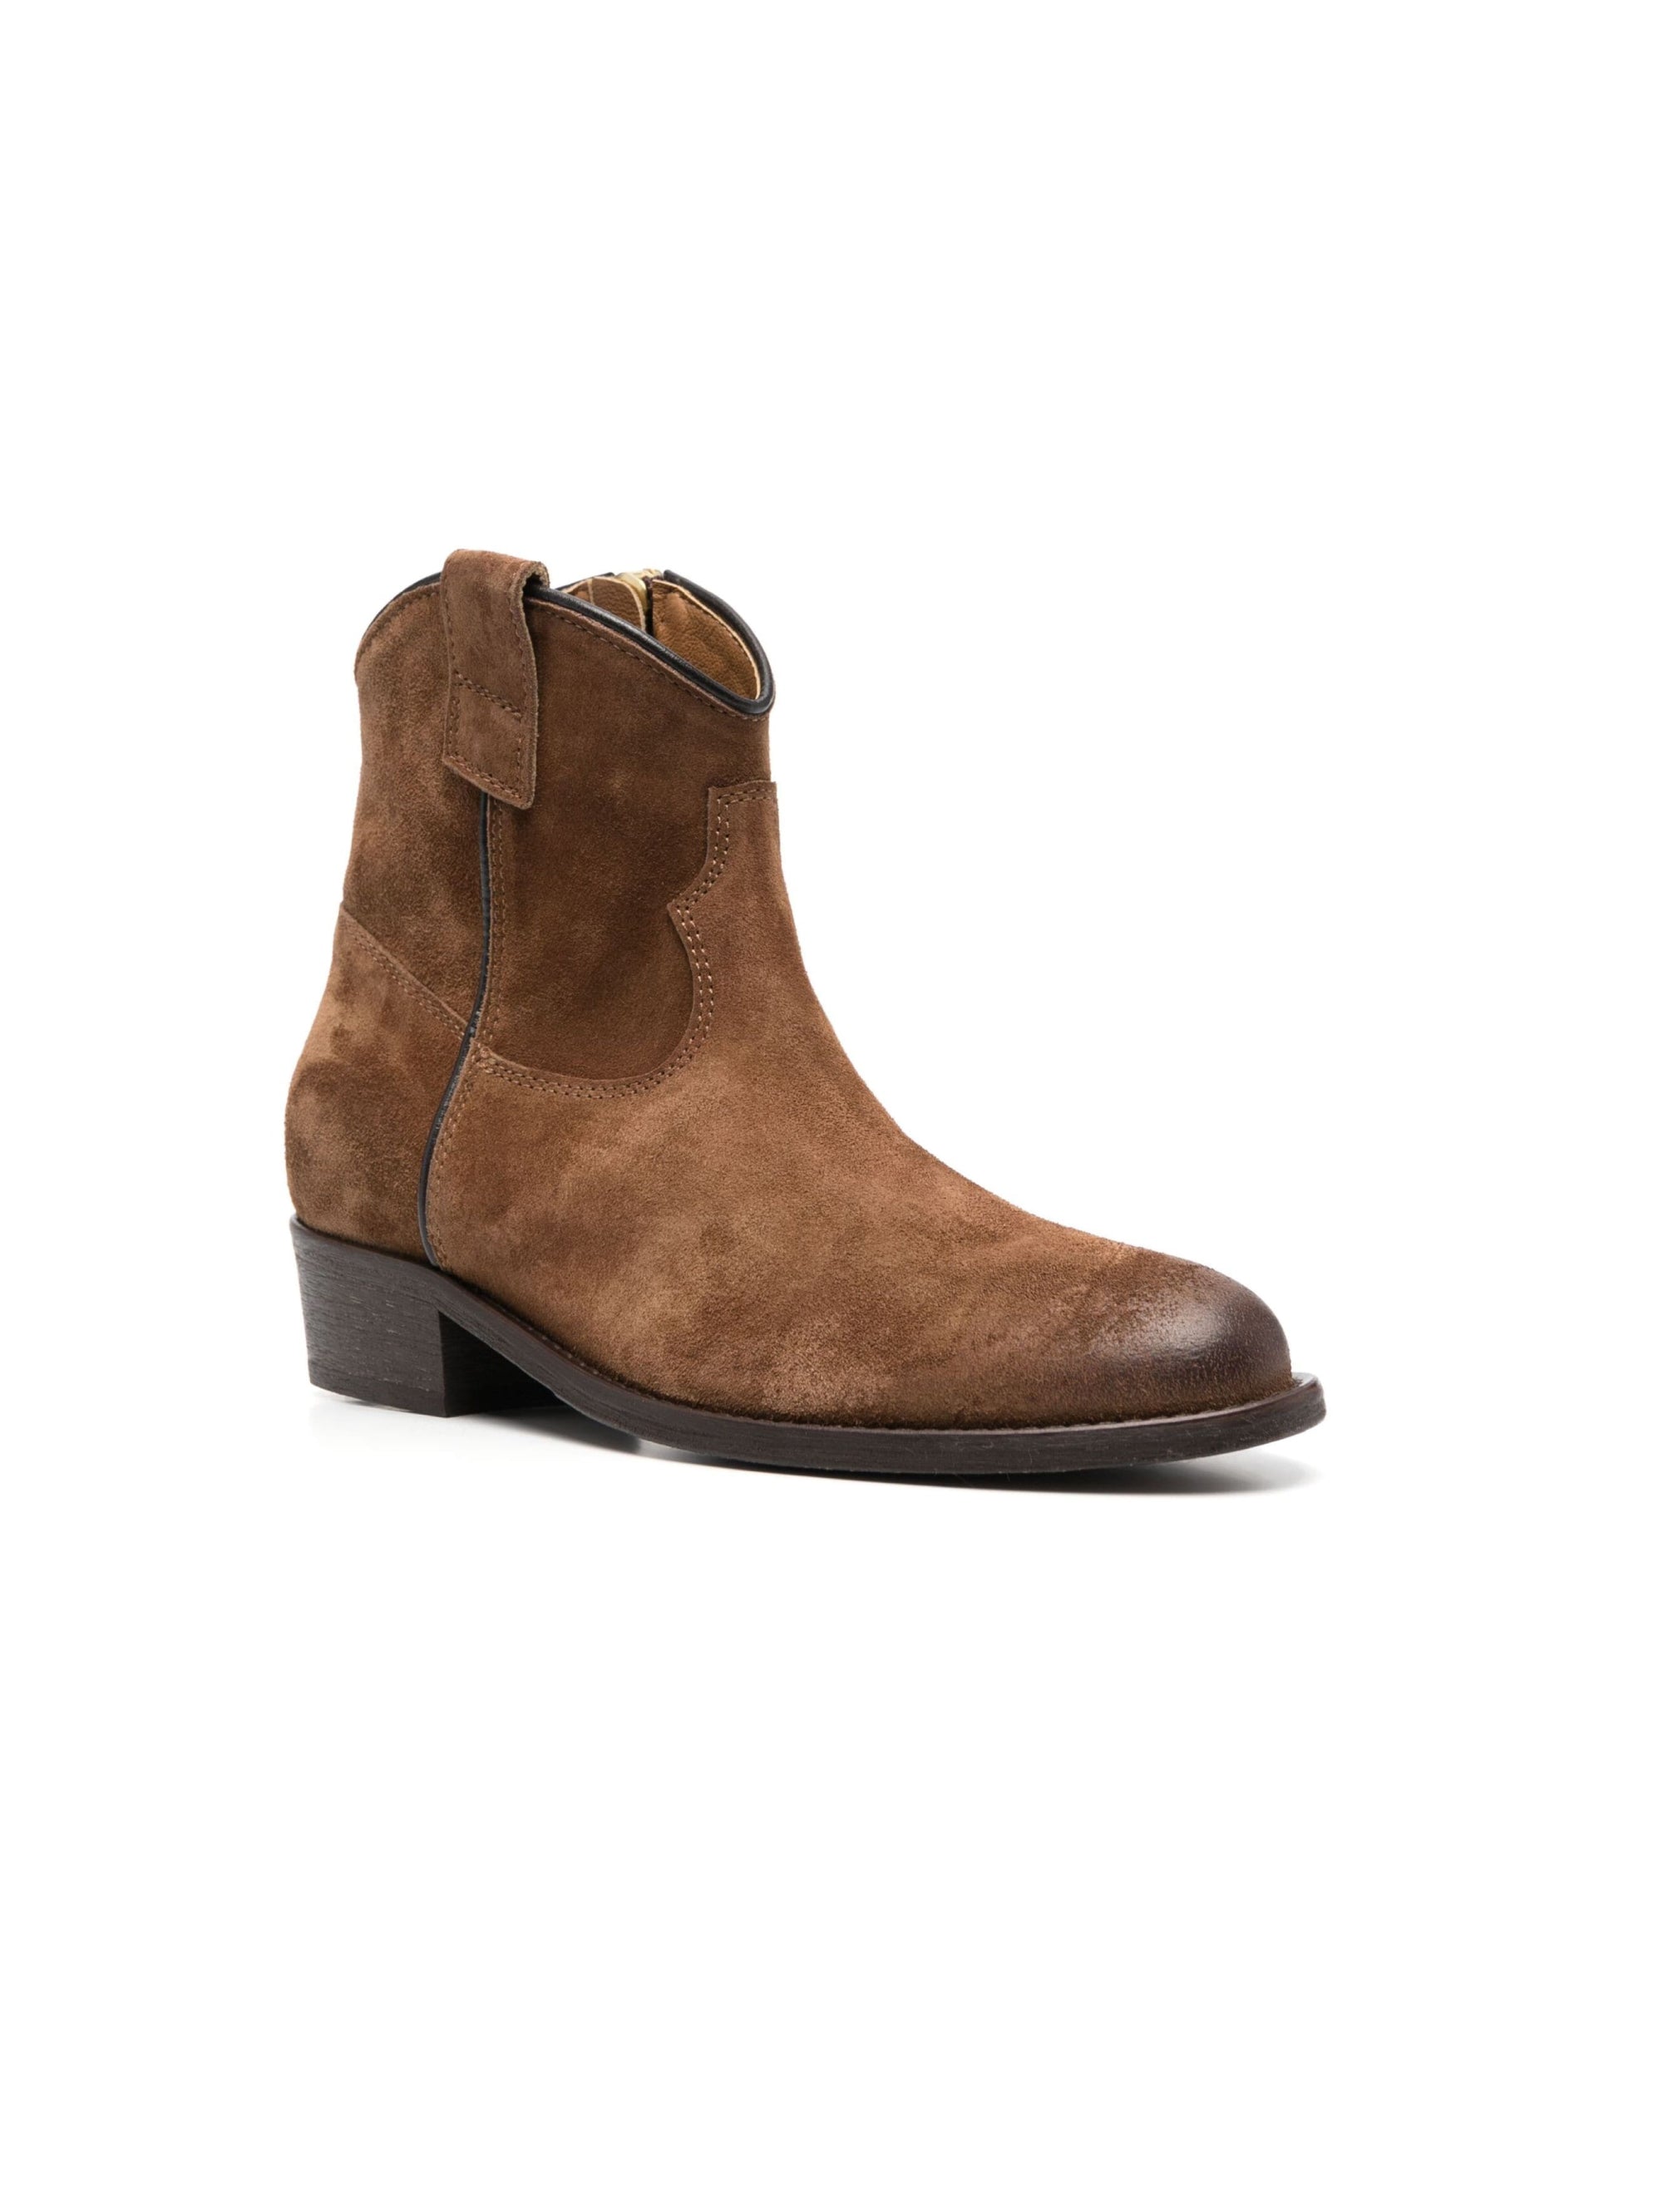 Texan ankle boots in marten suede